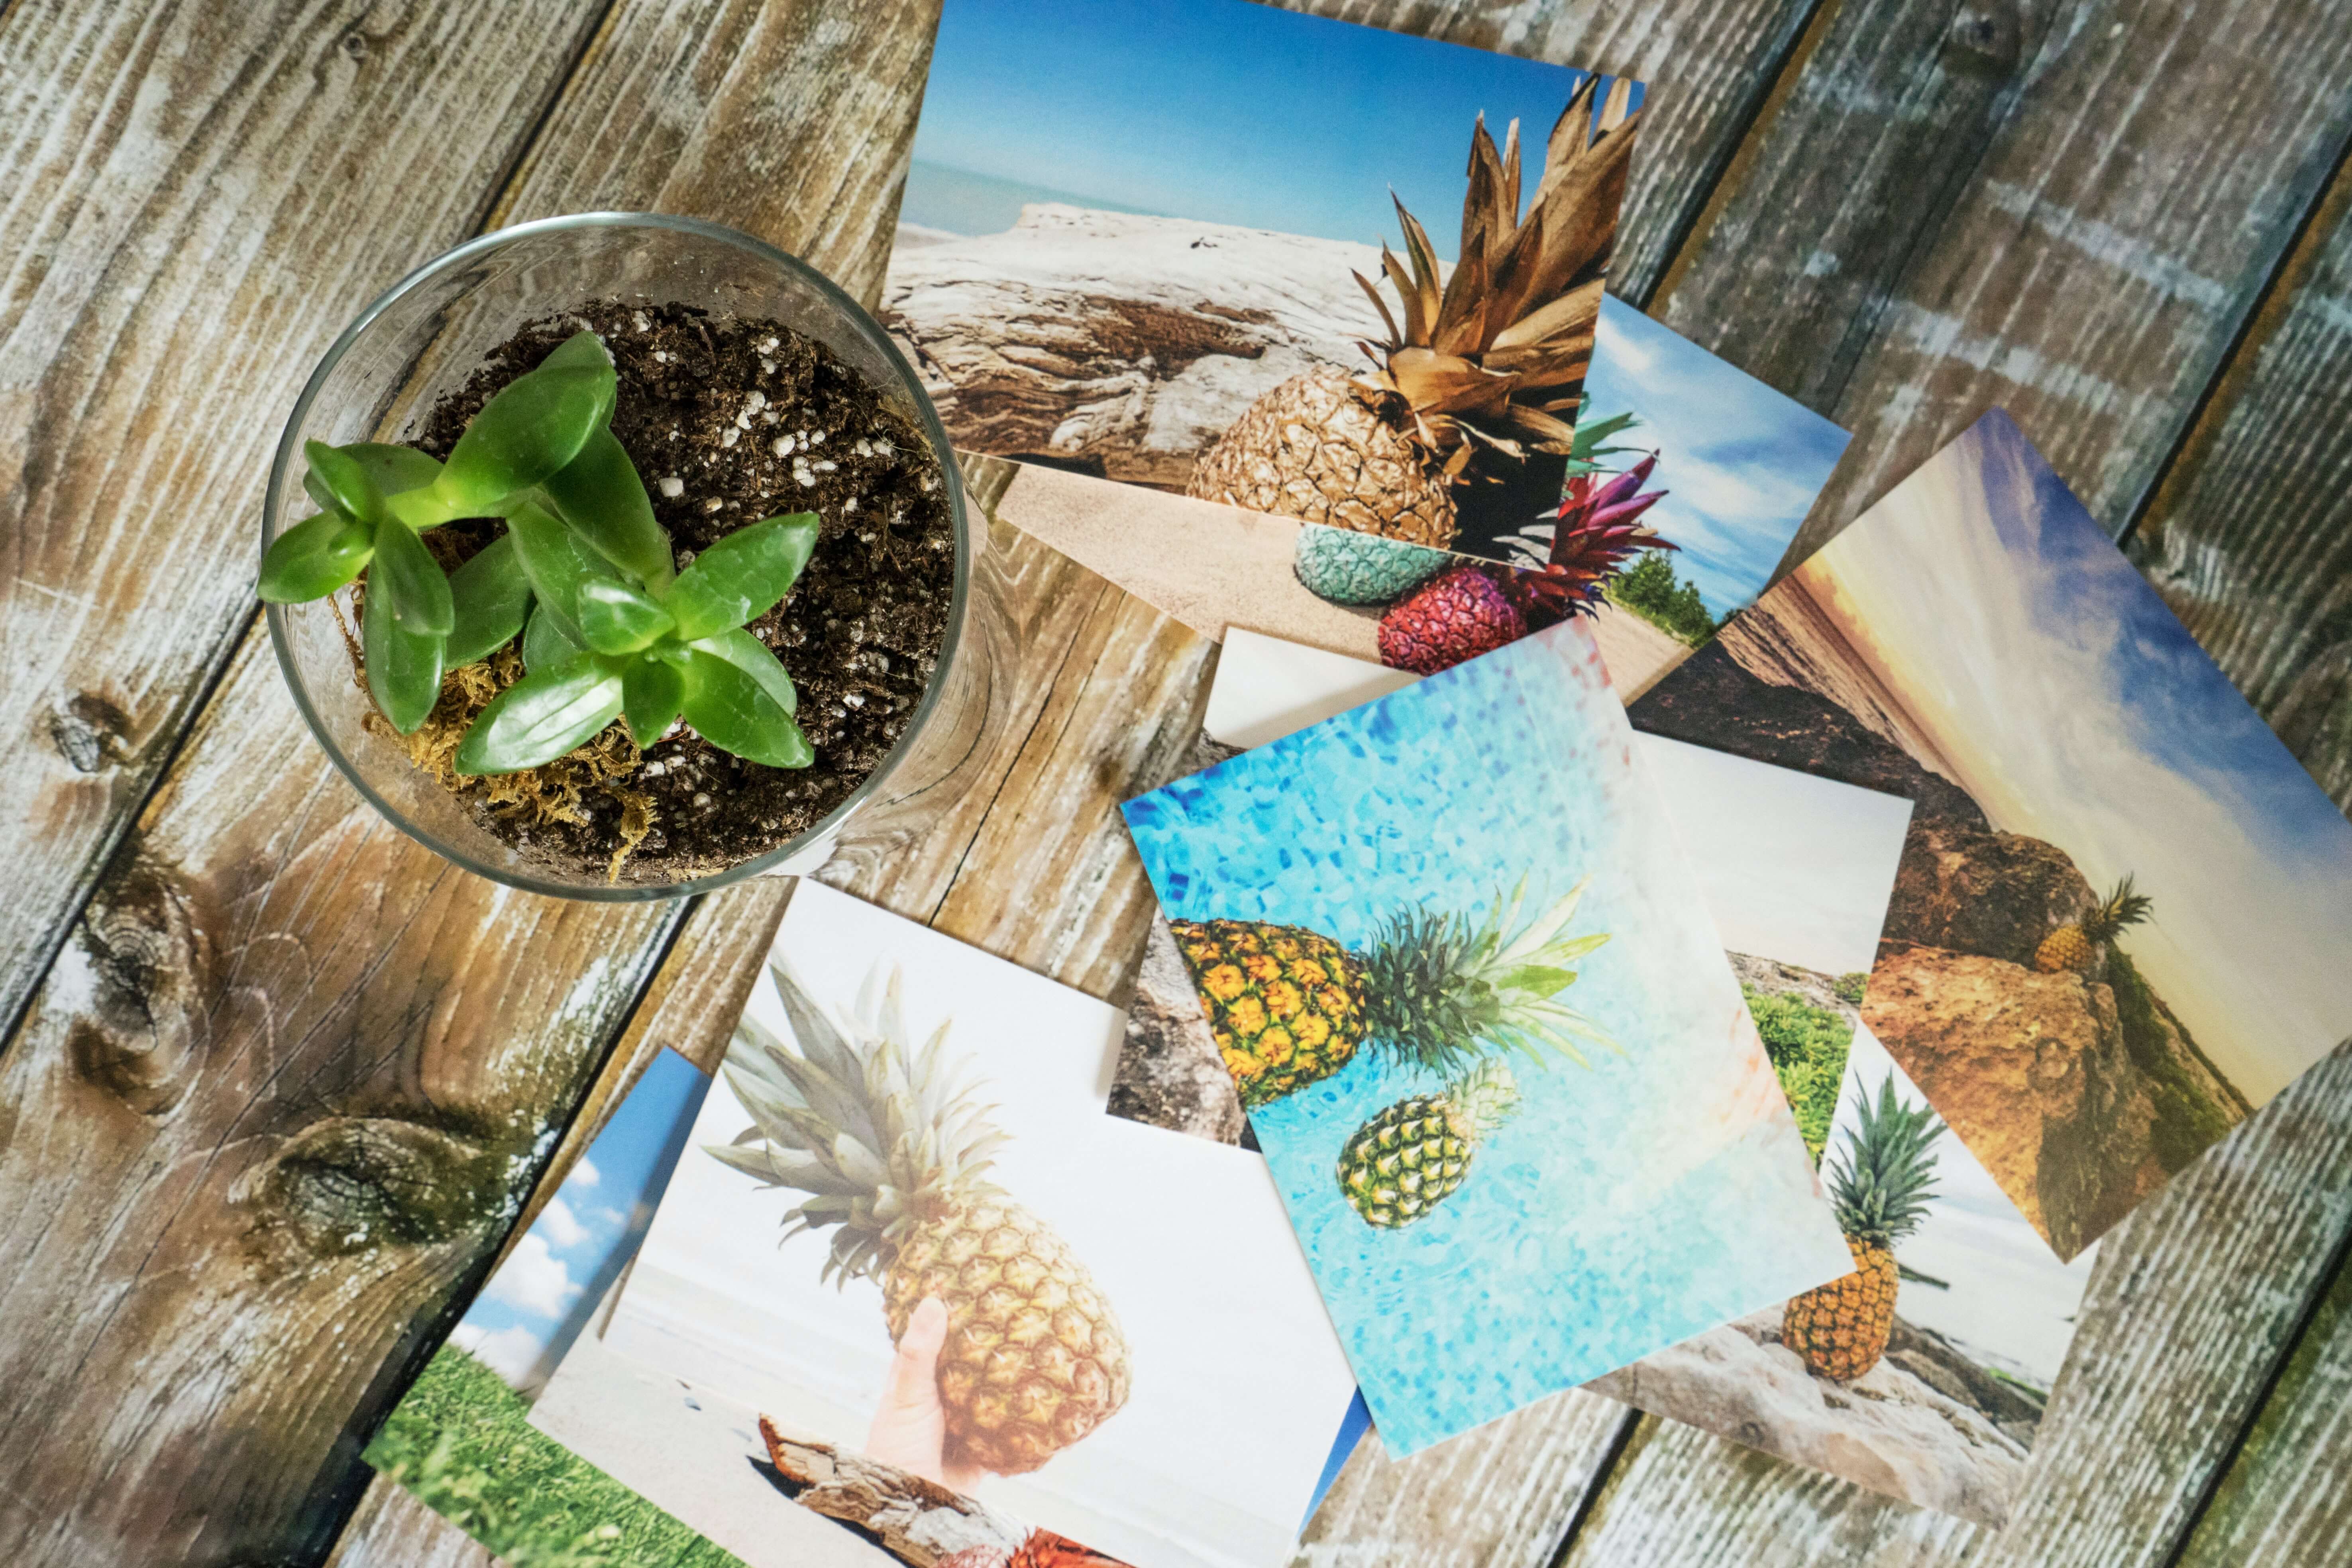 Postcards with a pineapple motif